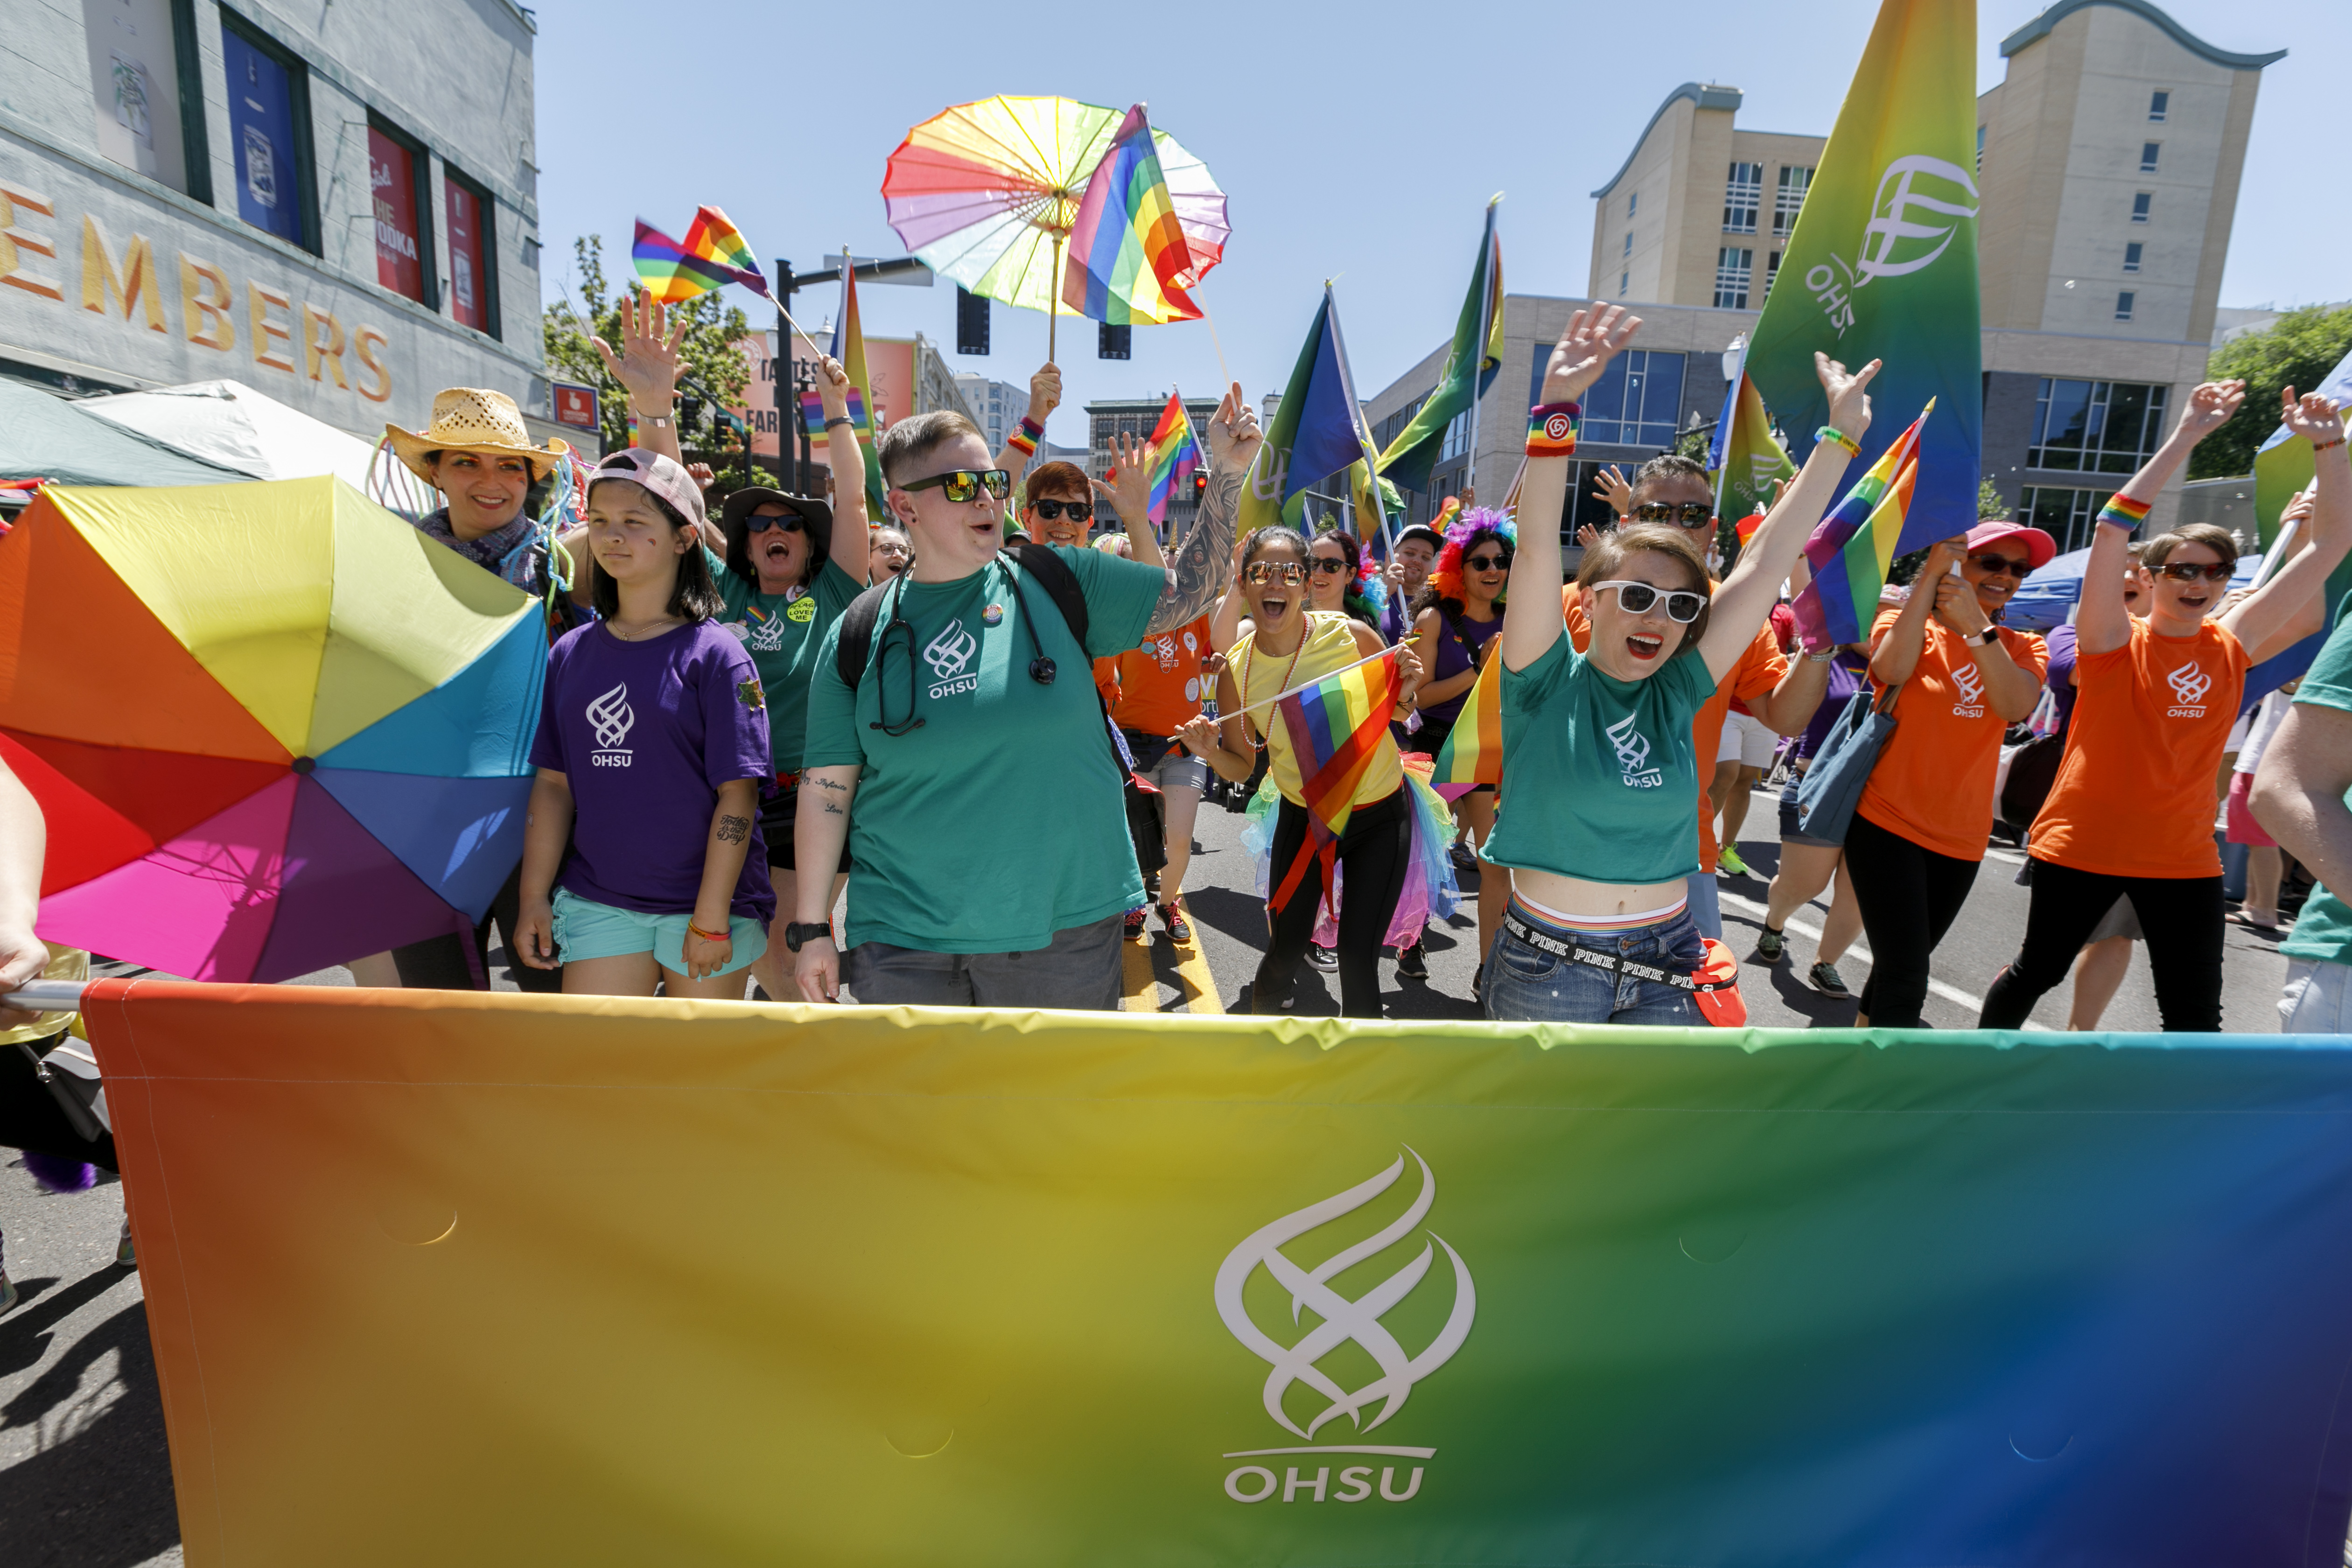 a group of smiling people with different colorful shirts featuring the OHSU logo march behind a rainbow OHSU banner